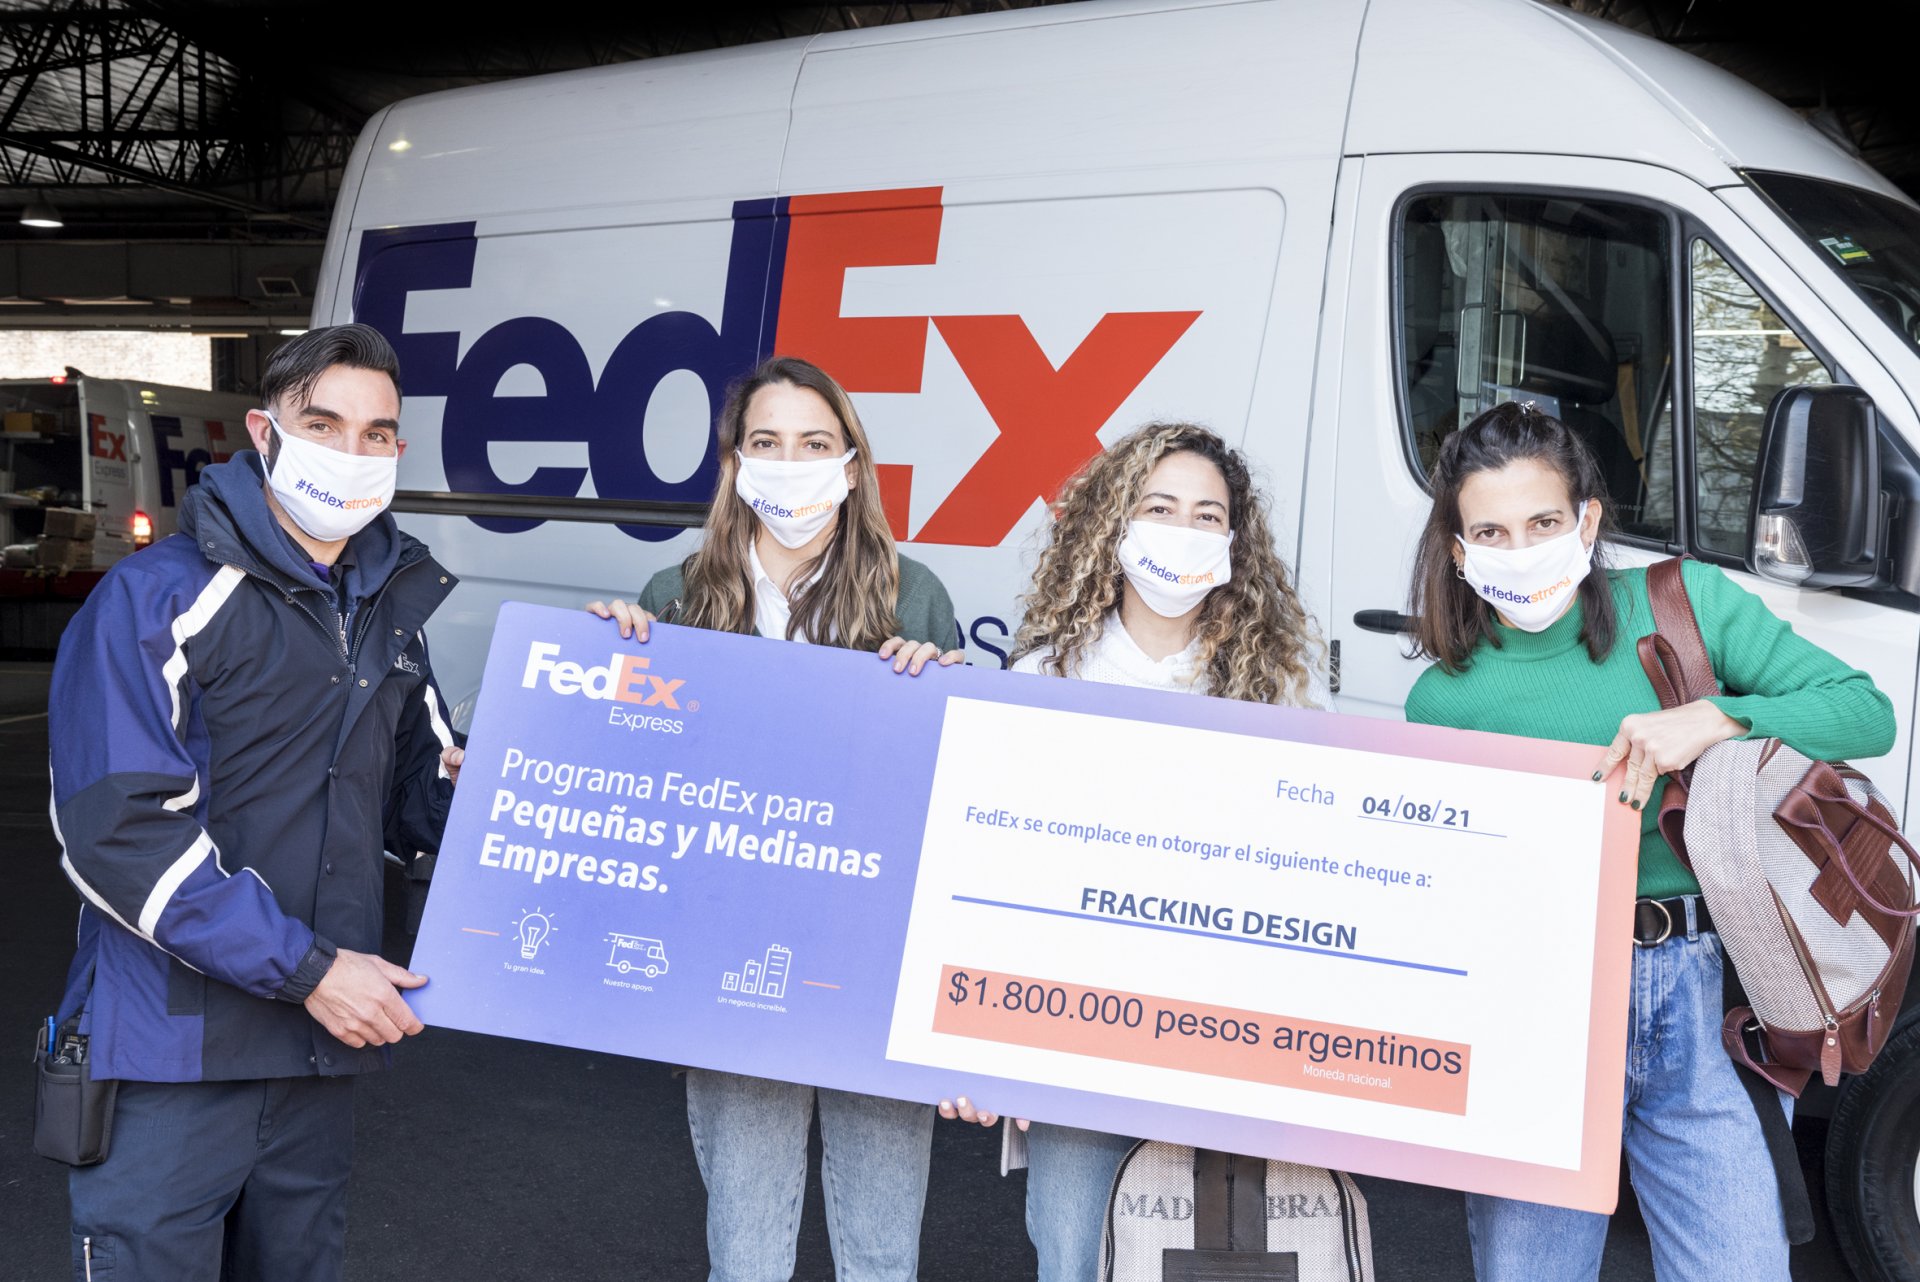 FedEx summons SMEs, startups and entrepreneurs to win seven million pesos: how to register